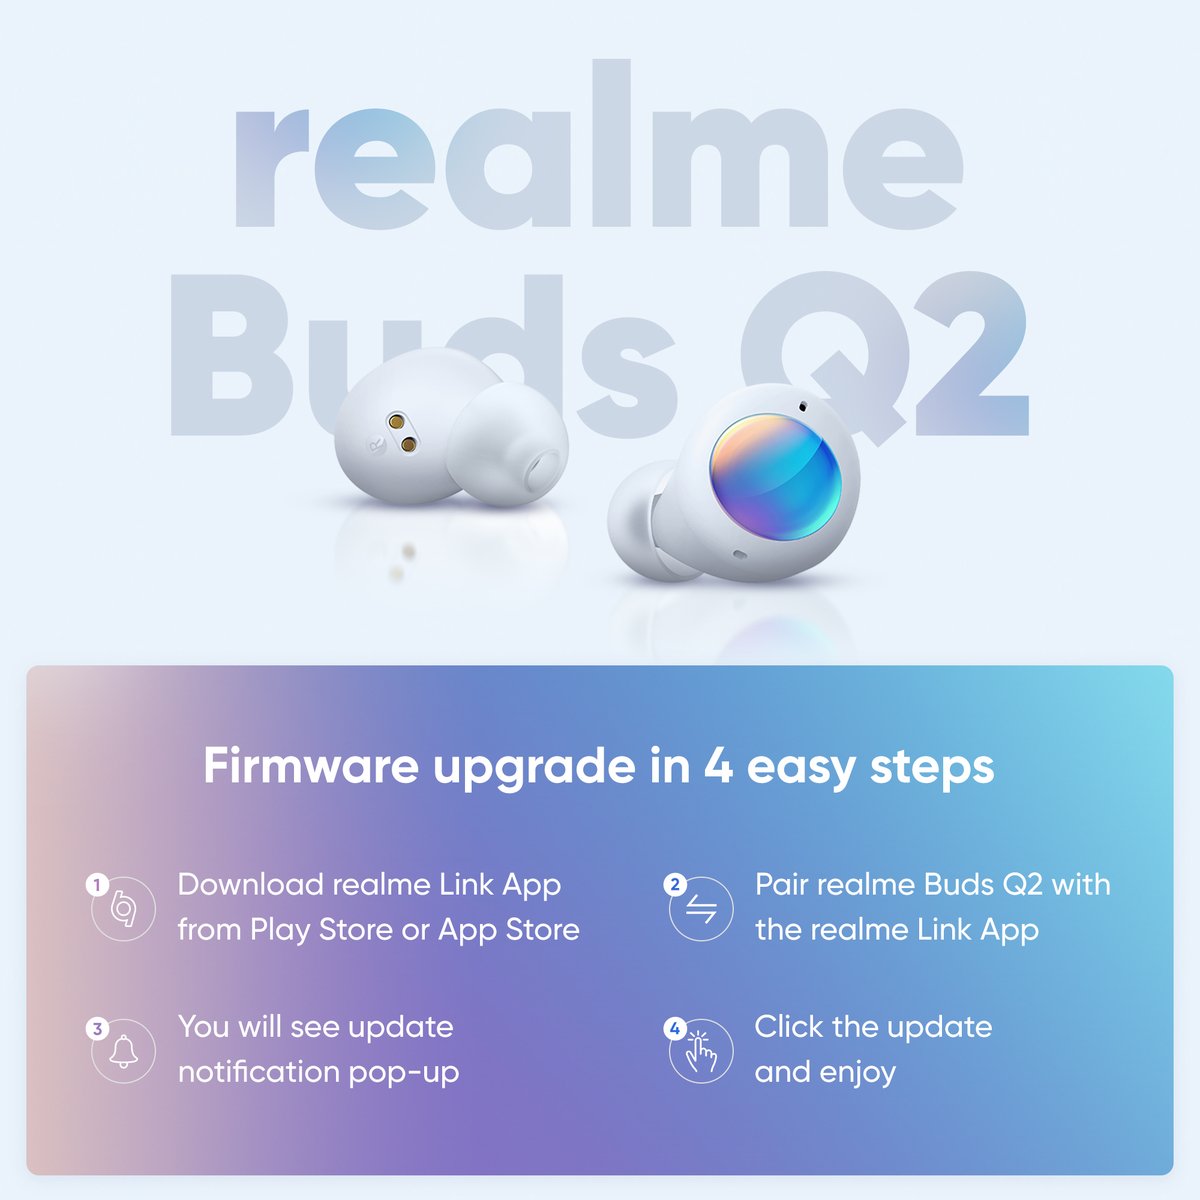 WE CARE FOR YOU😇😇😇
New Update for Buds Q2
#realmeBudsQ2